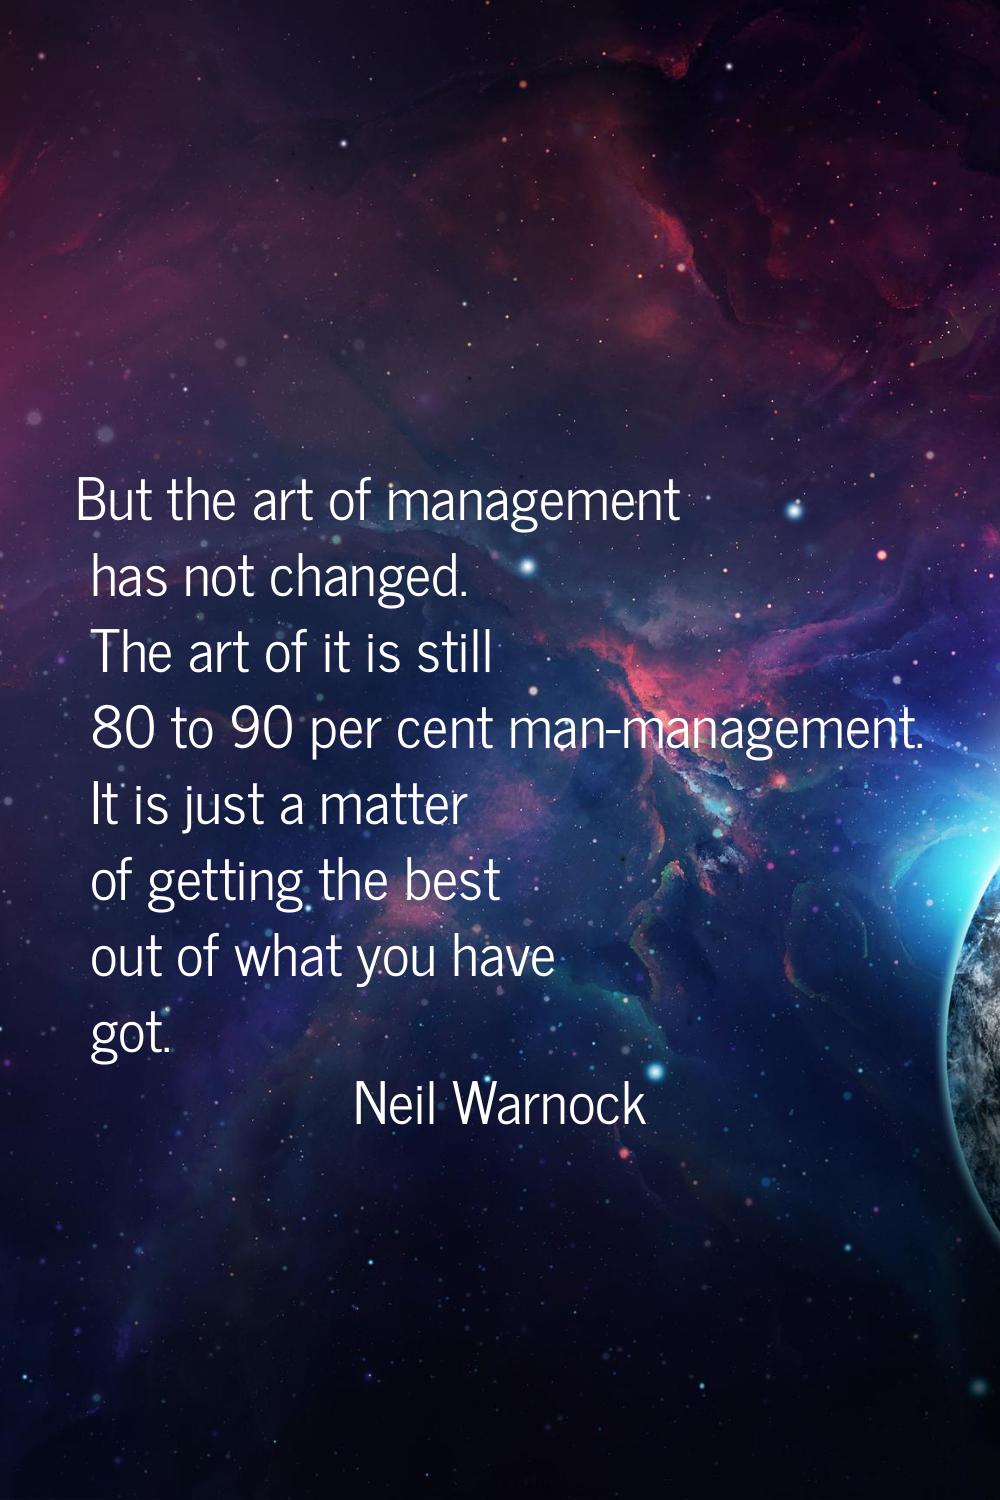 But the art of management has not changed. The art of it is still 80 to 90 per cent man-management.